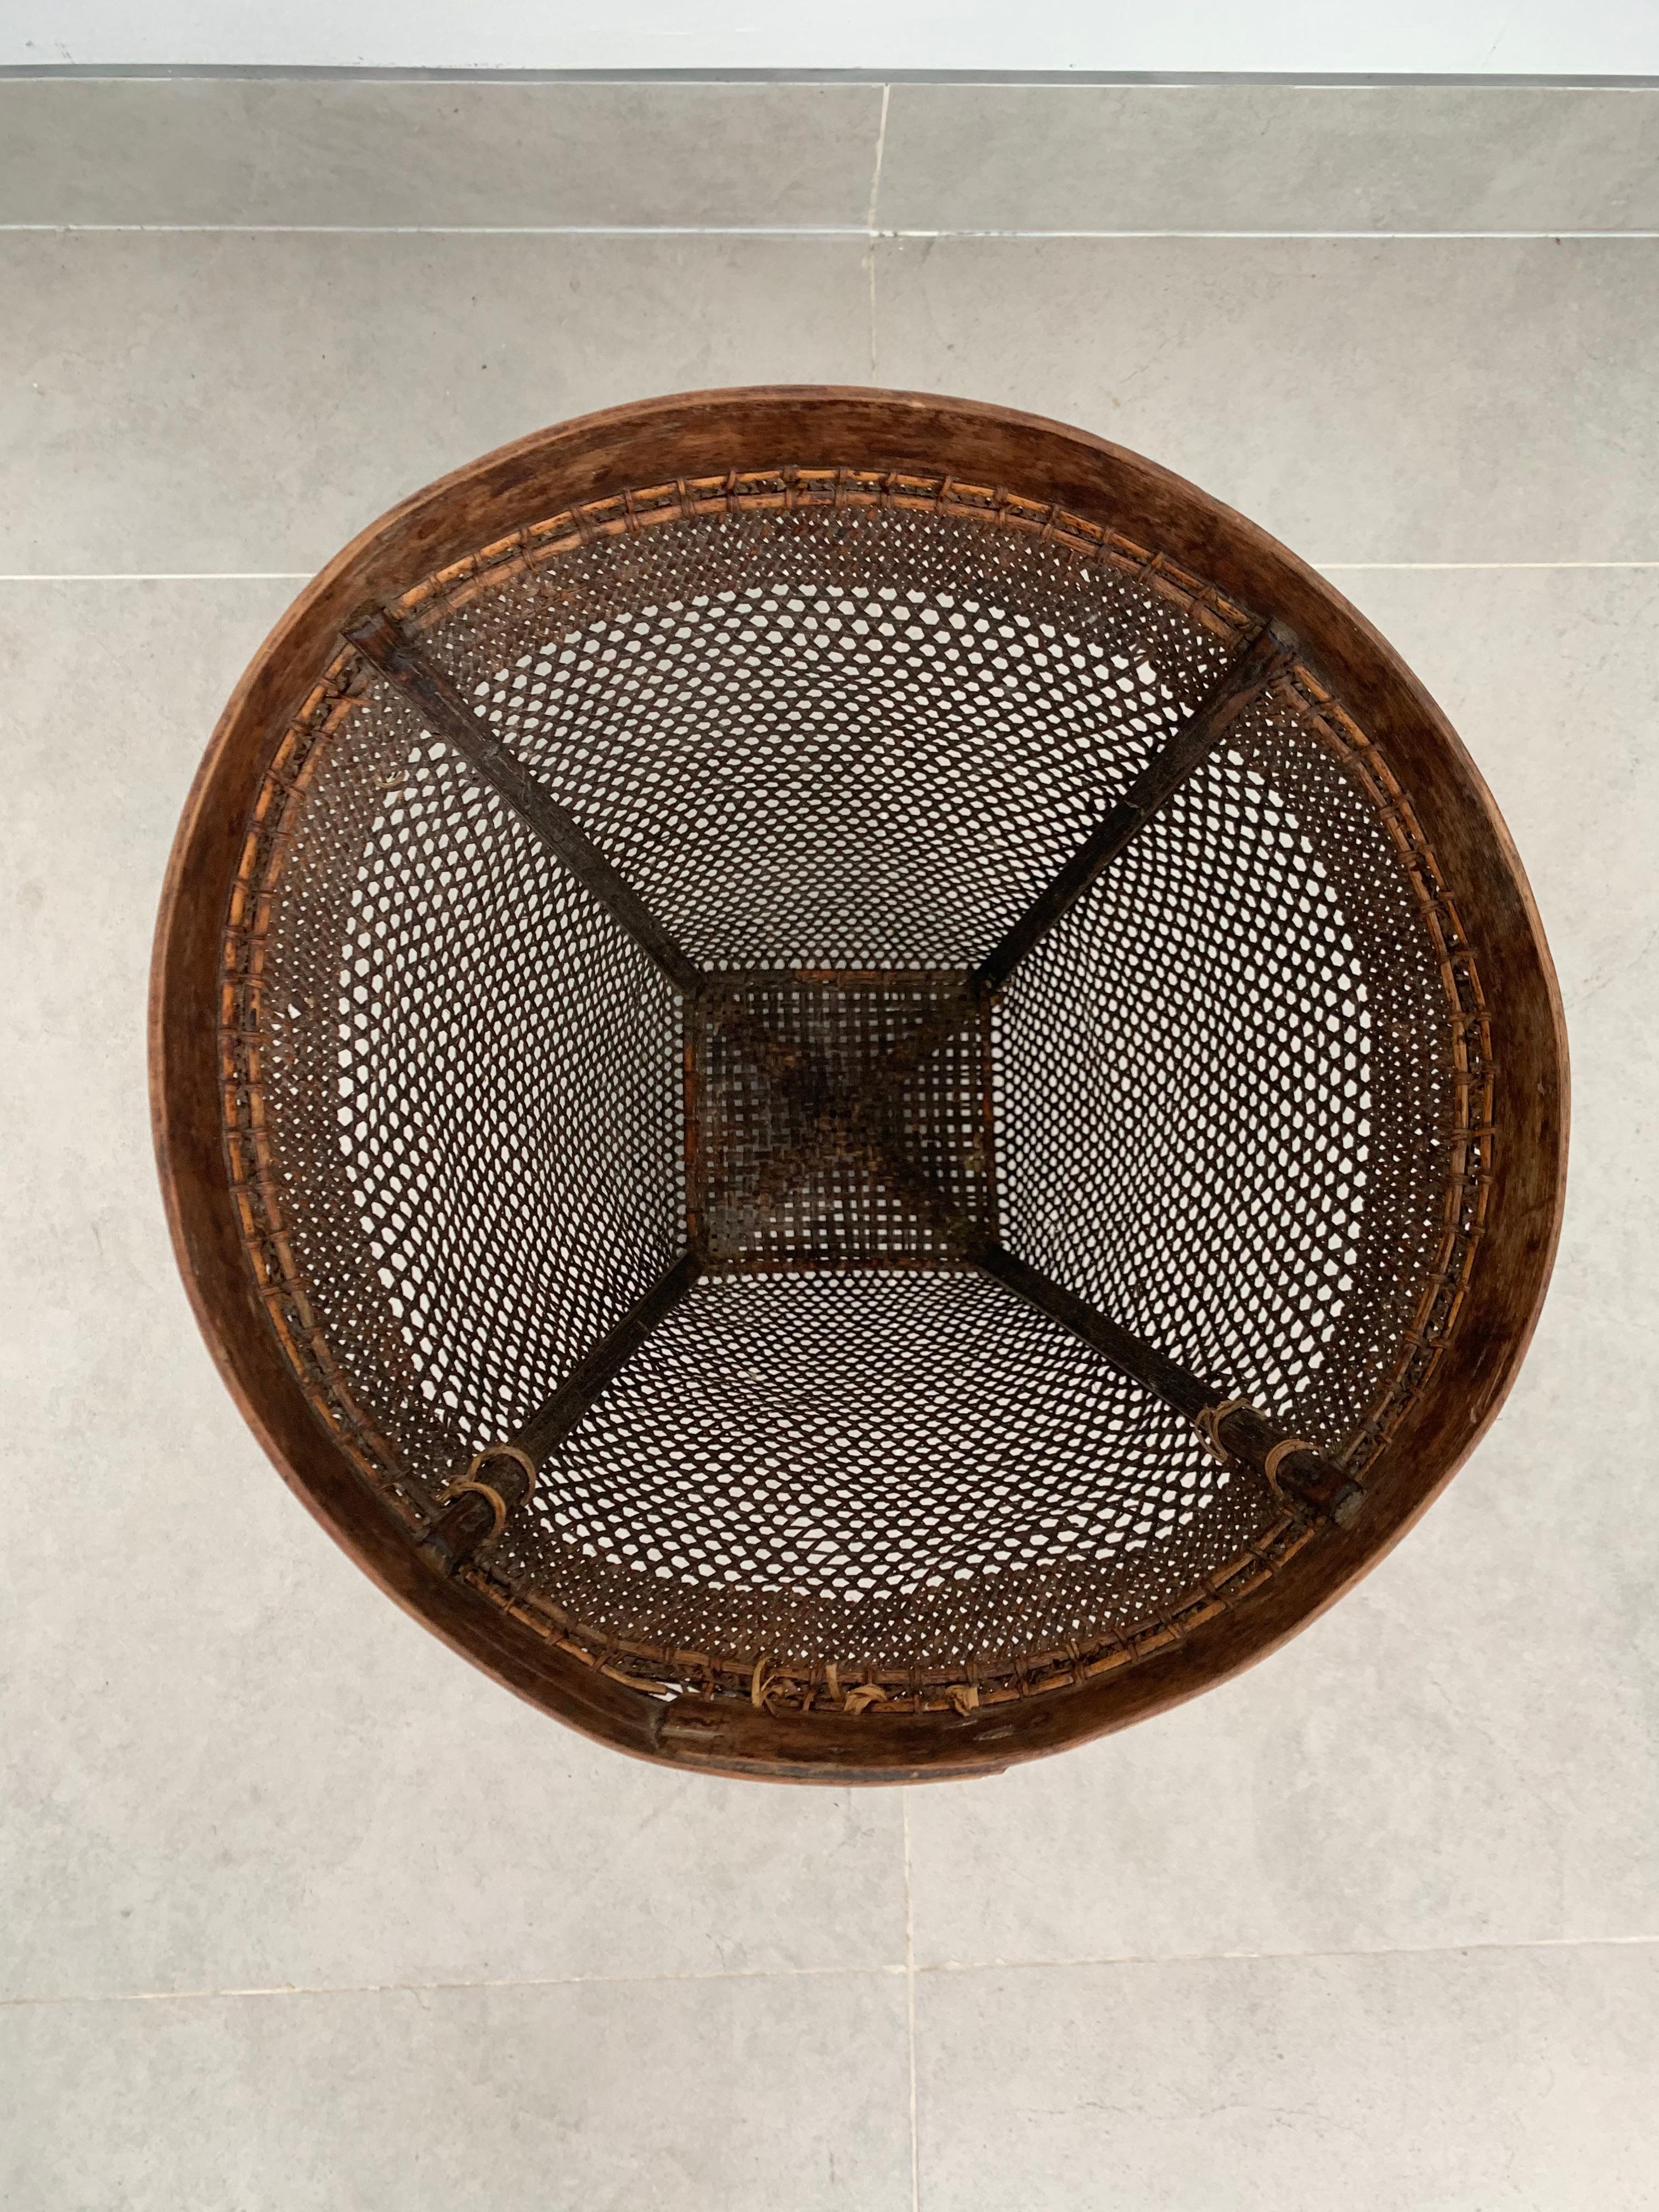 Rattan Basket Dayak Tribe Hand-Woven from Kalimantan, Borneo, Mid 20th Century For Sale 1